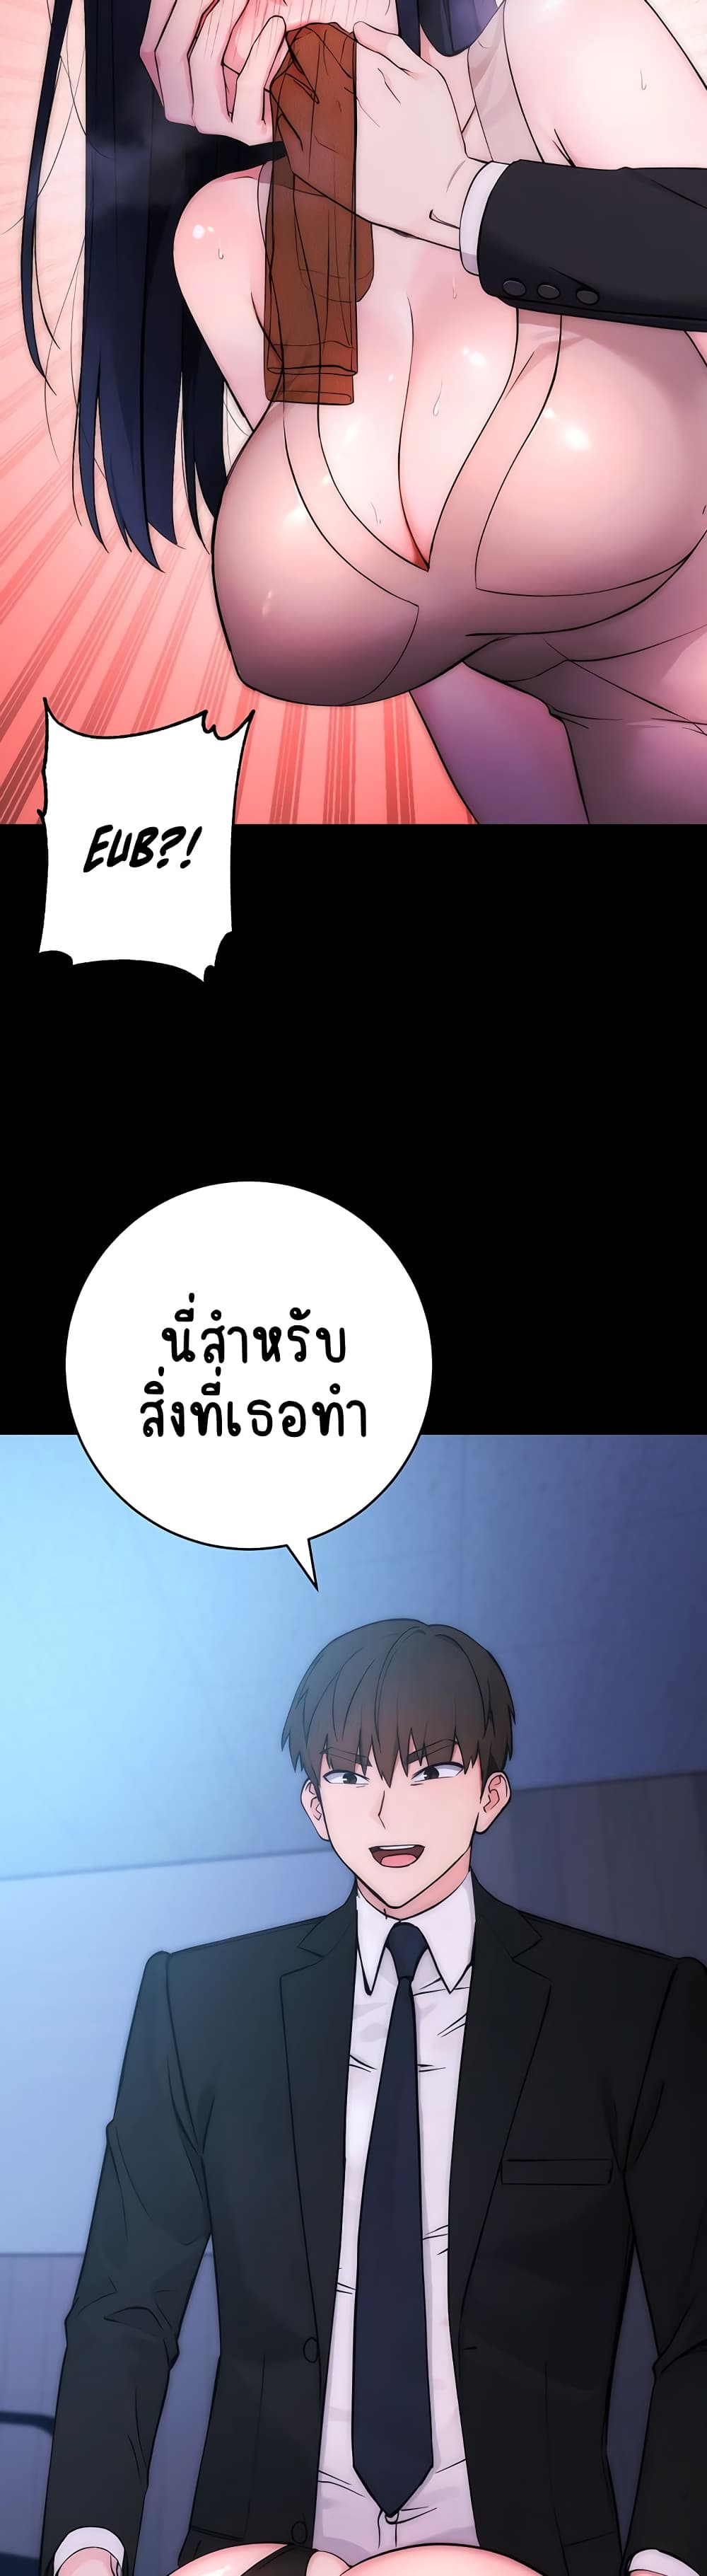 Outsider: The Invisible Man ตอนที่ 1 ภาพ 44